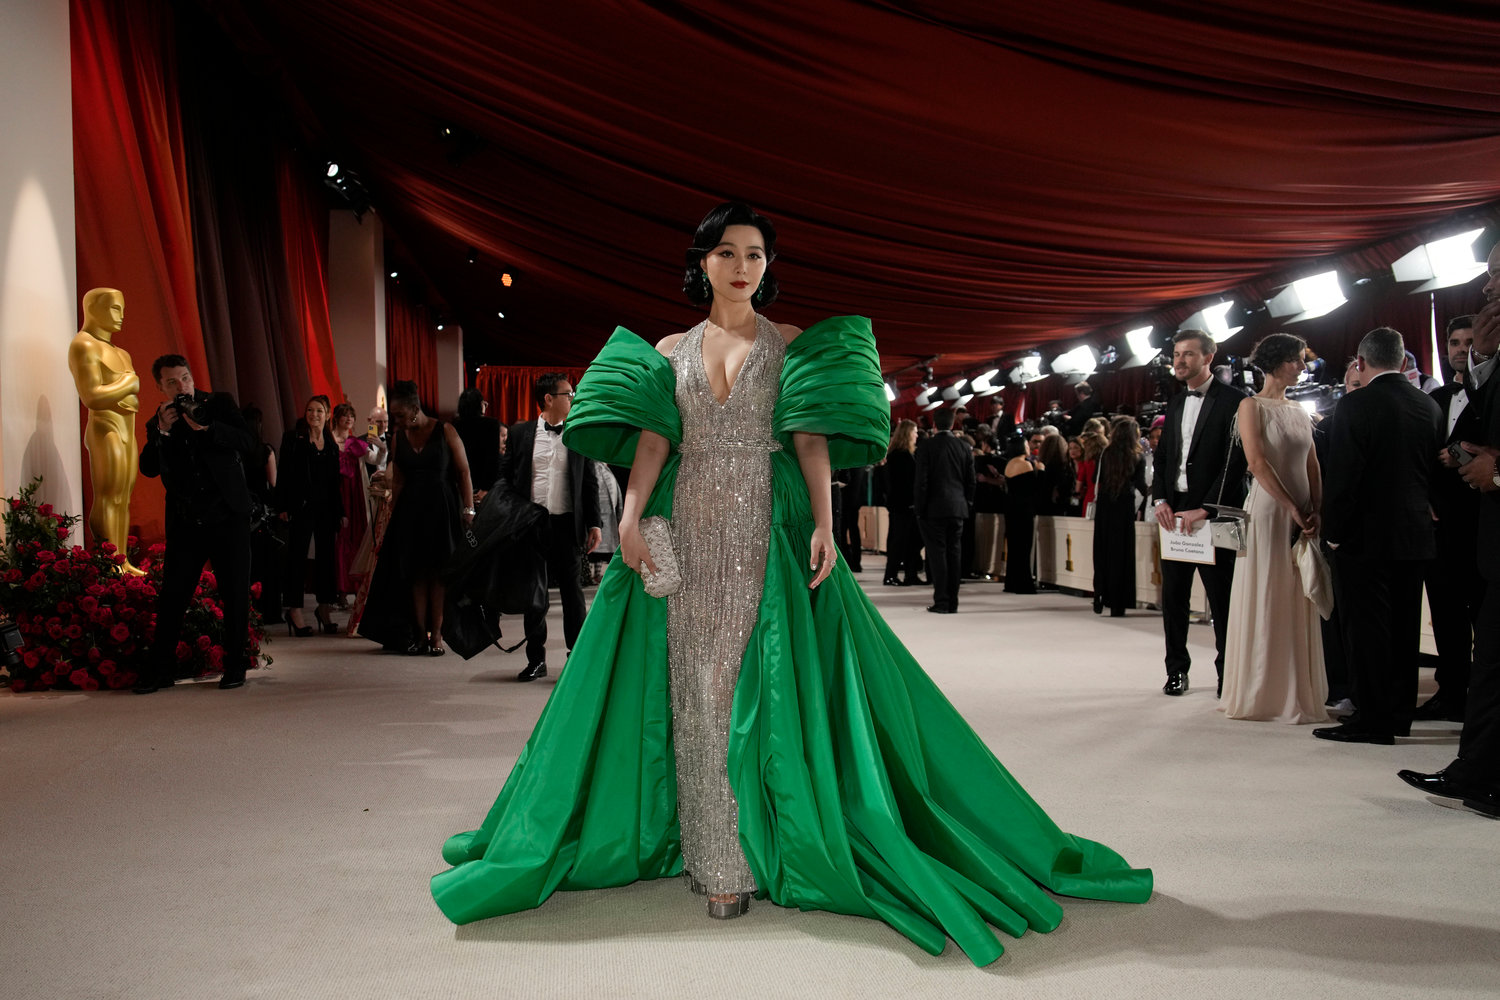 Fan Bingbing arrives at the Oscars on Sunday, March 12, 2023, at the Dolby Theatre in Los Angeles. (AP Photo/John Locher)